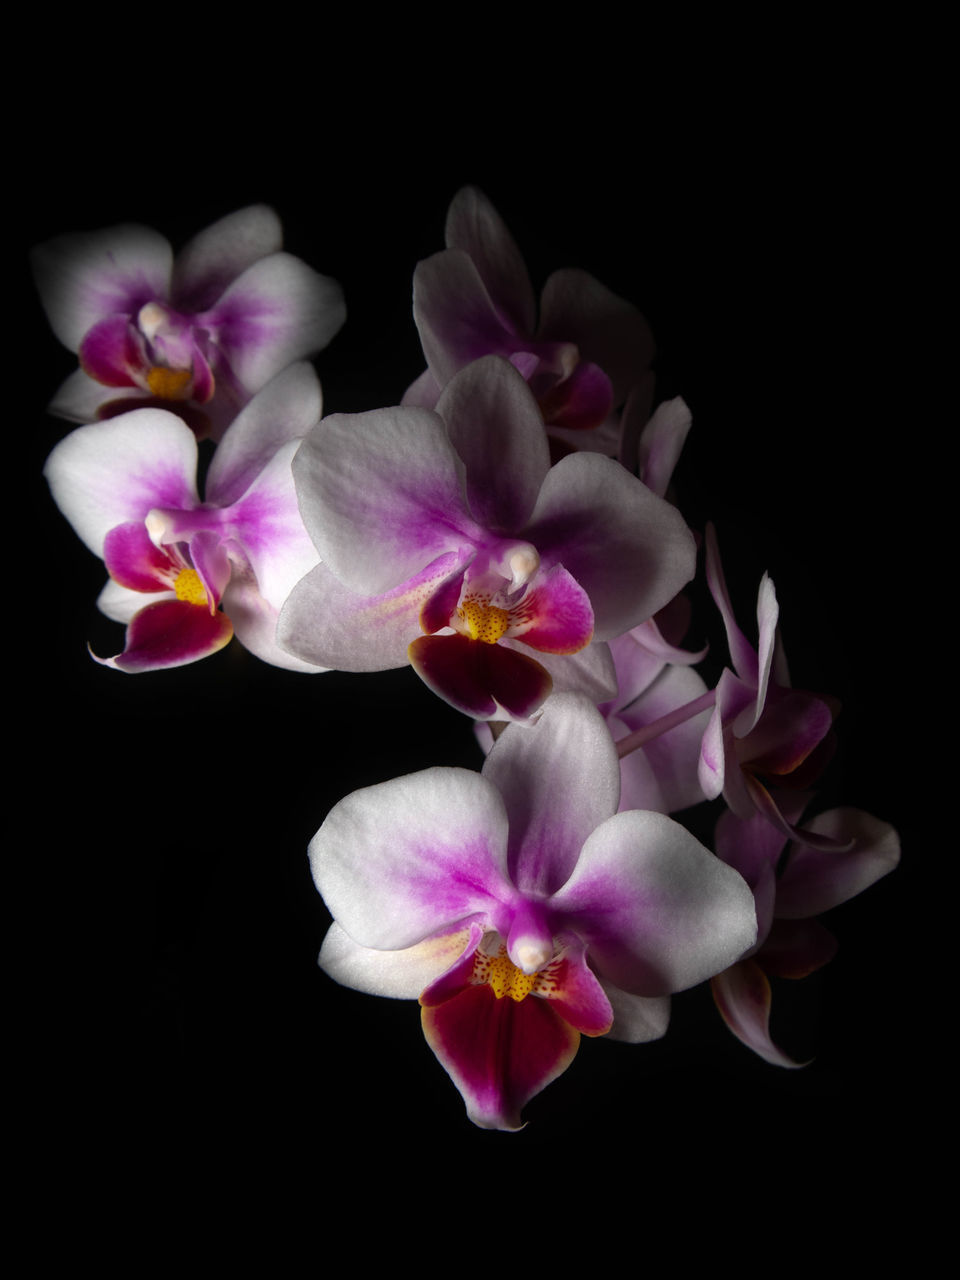 CLOSE-UP OF PINK ORCHID FLOWERS